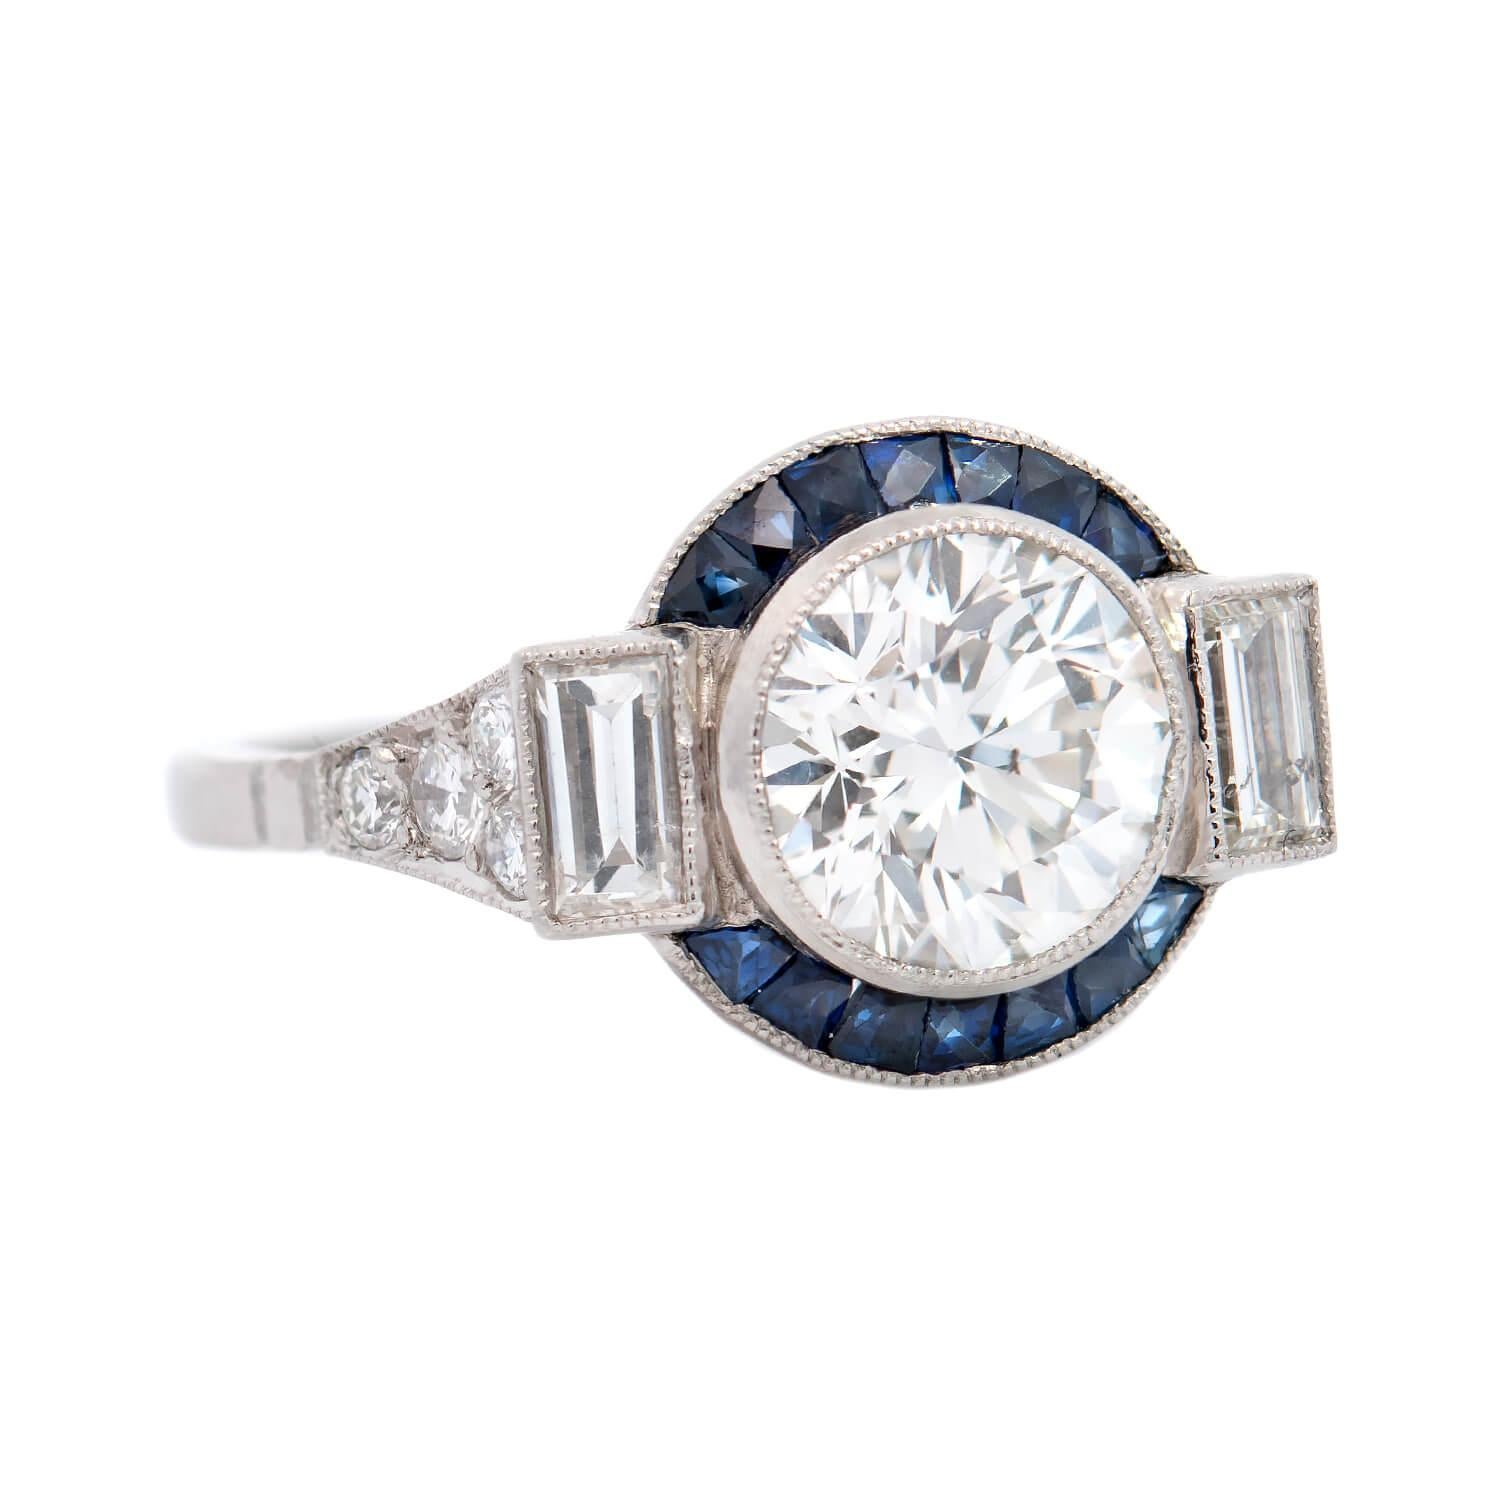 An outstanding contemporarily made engagement ring in the Art Deco style! This stunning piece is crafted in platinum and features a gorgeous old European Cut diamond resting in the center of an exquisite setting. The bezel set diamond weighs